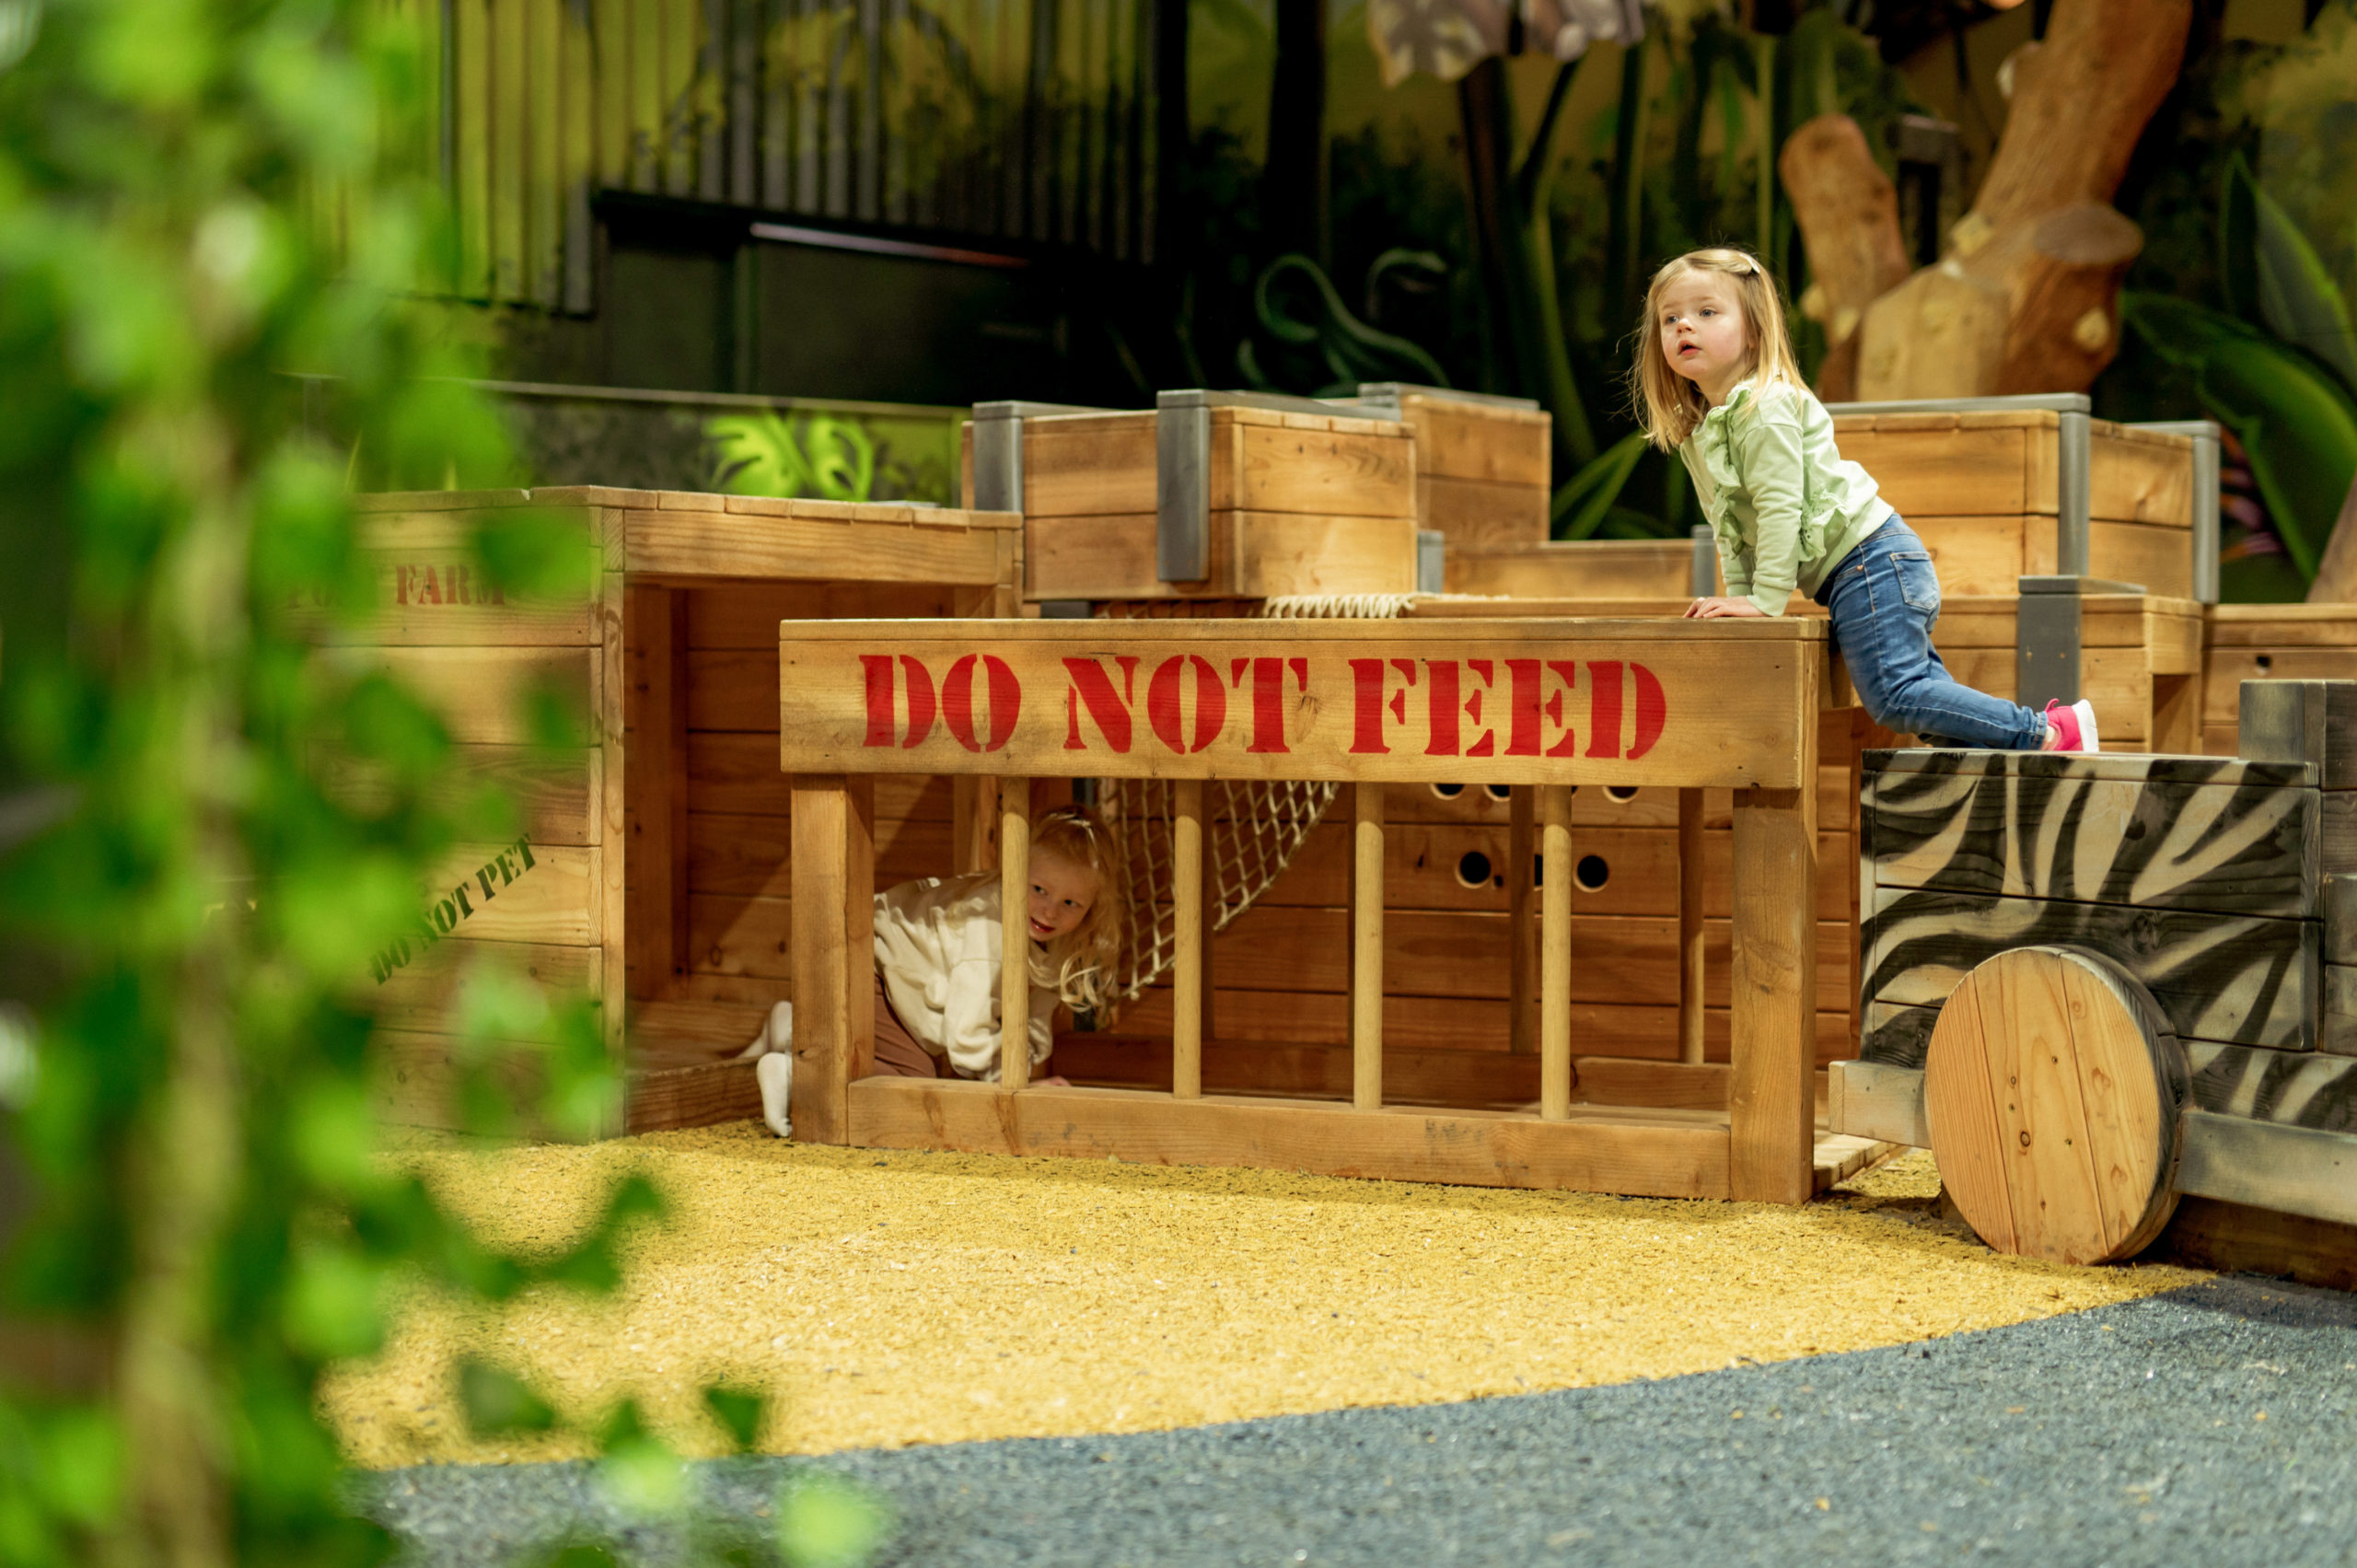 A playful scene where a child climbing on a wooden enclosure that has ‘DO NOT FEED’ written on it, while another child peeks out from inside the enclosure.